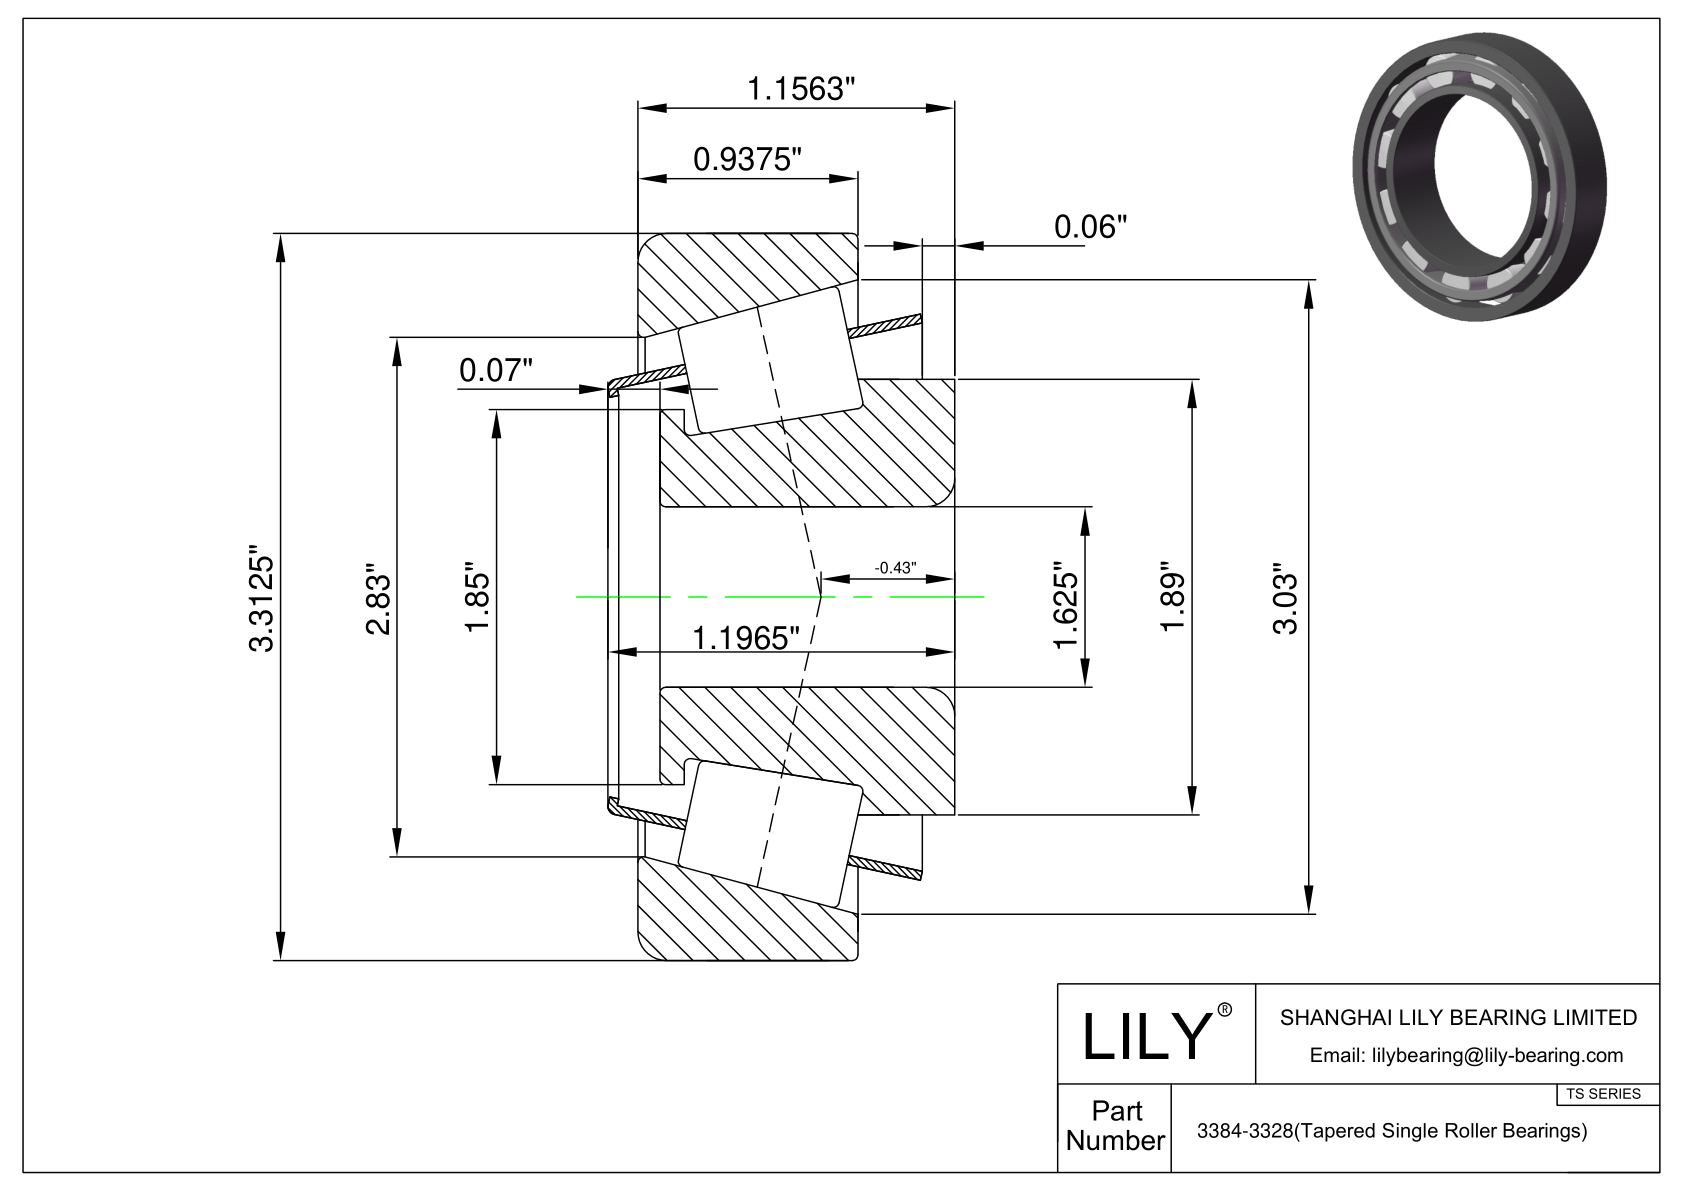 3384-3328 TS (Tapered Single Roller Bearings) (Imperial) cad drawing